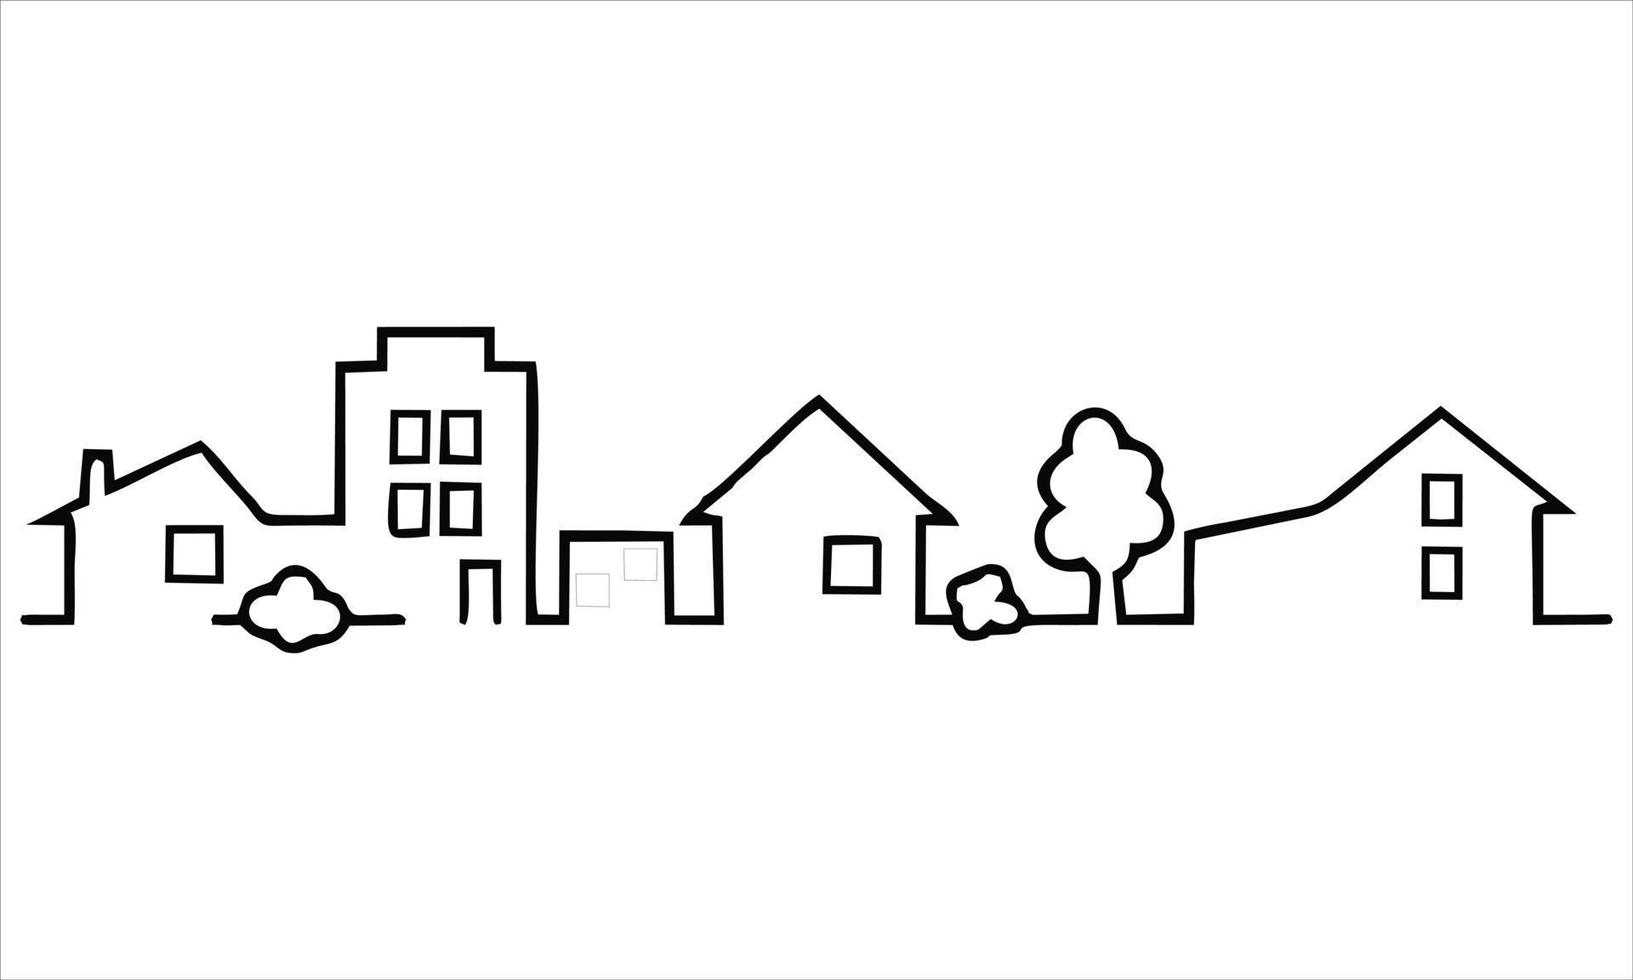 Illustration of a row of buildings and tall houses lined up to form a row of comfortable settlements. A symbol of quiet and comfortable urban life. Editable Vector